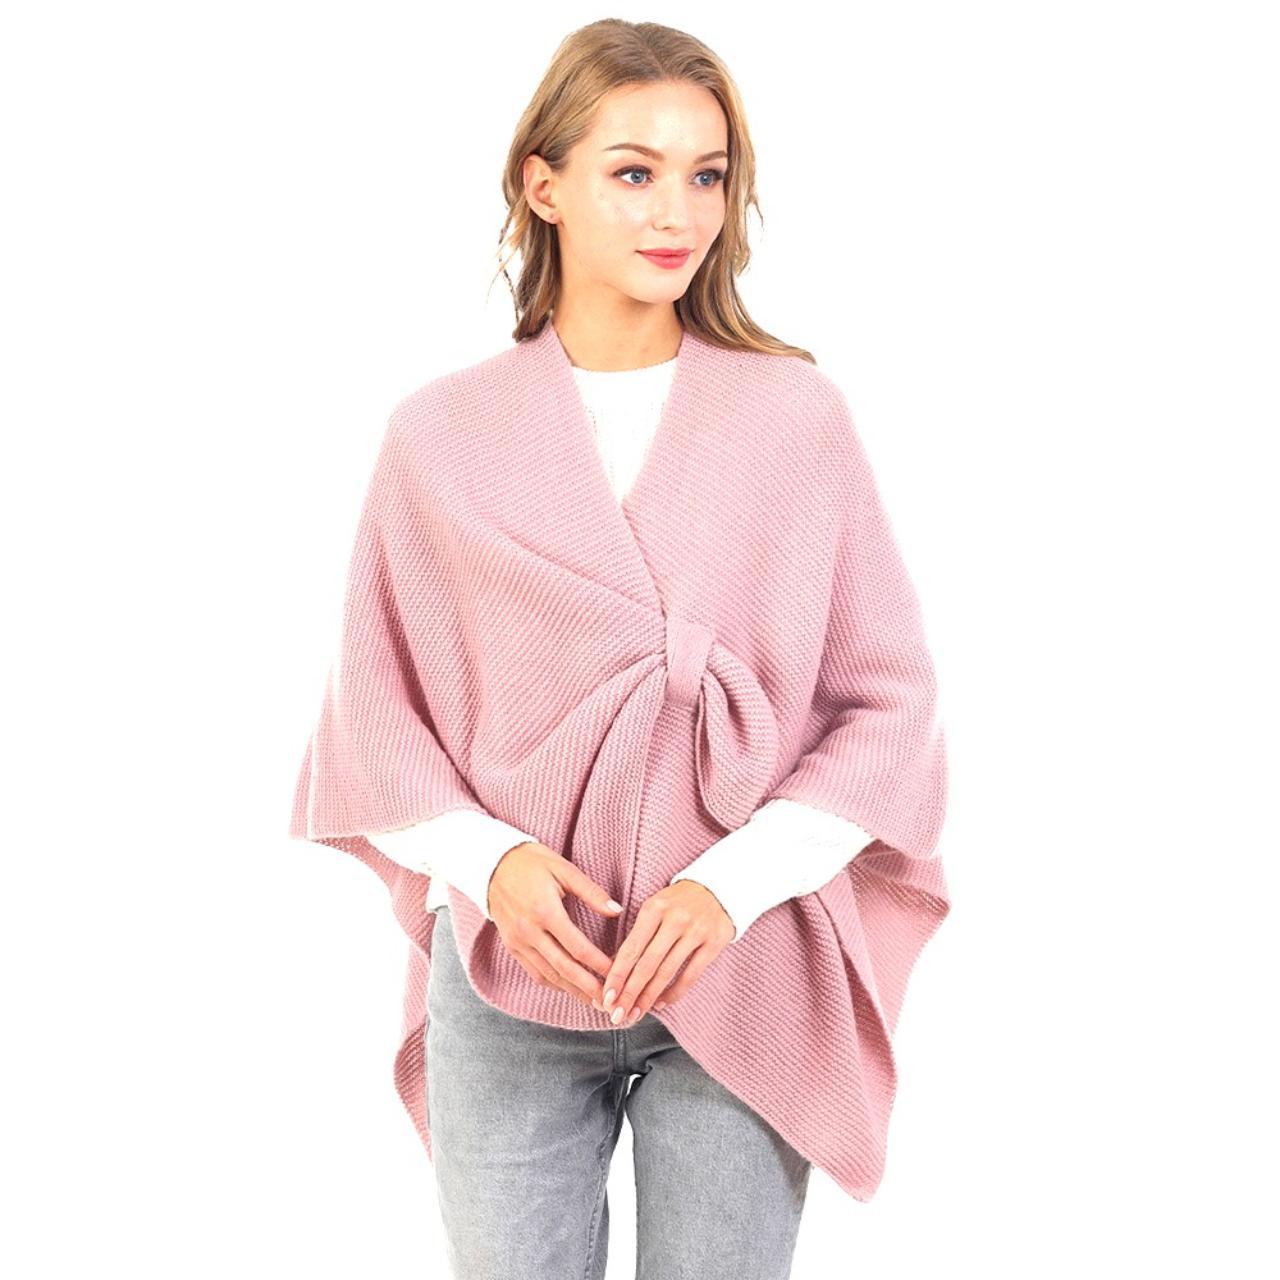 💗💗💗PINK KNIT PULL THROUGH CAPE PONCHO💗💗💗 A... - Depop